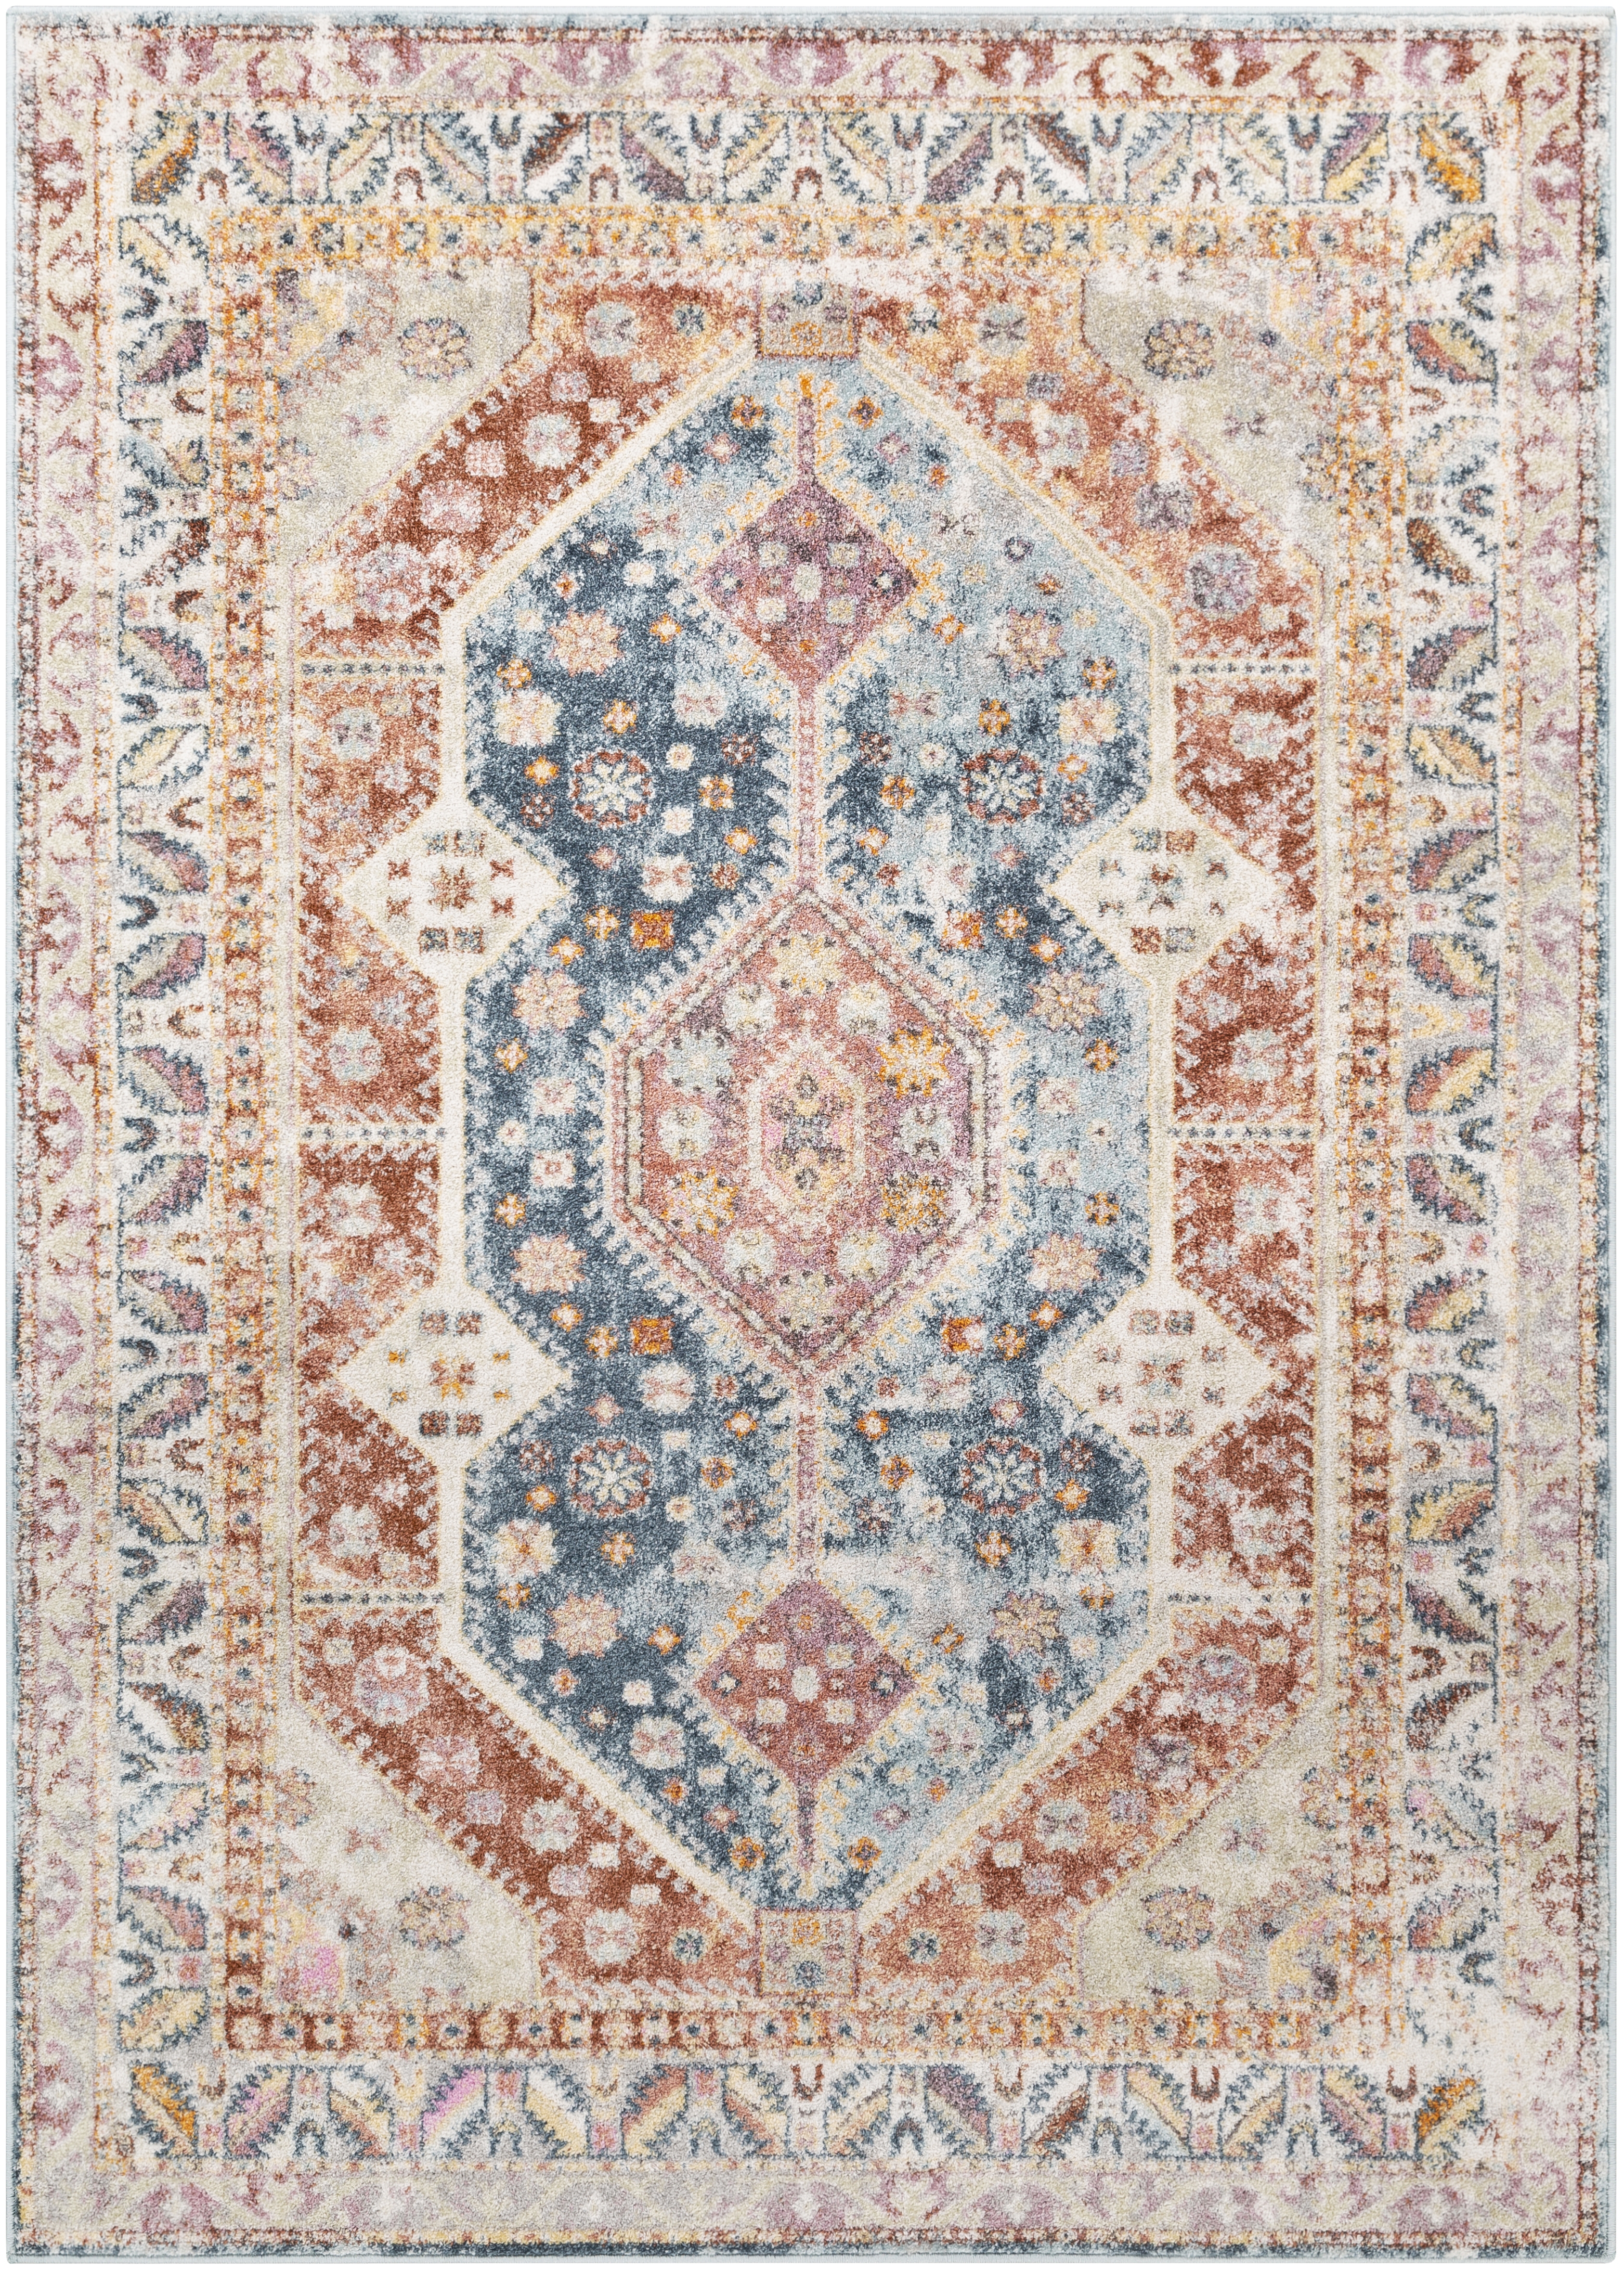 New Mexico Rug, 5'3" x 7'3" - Image 0